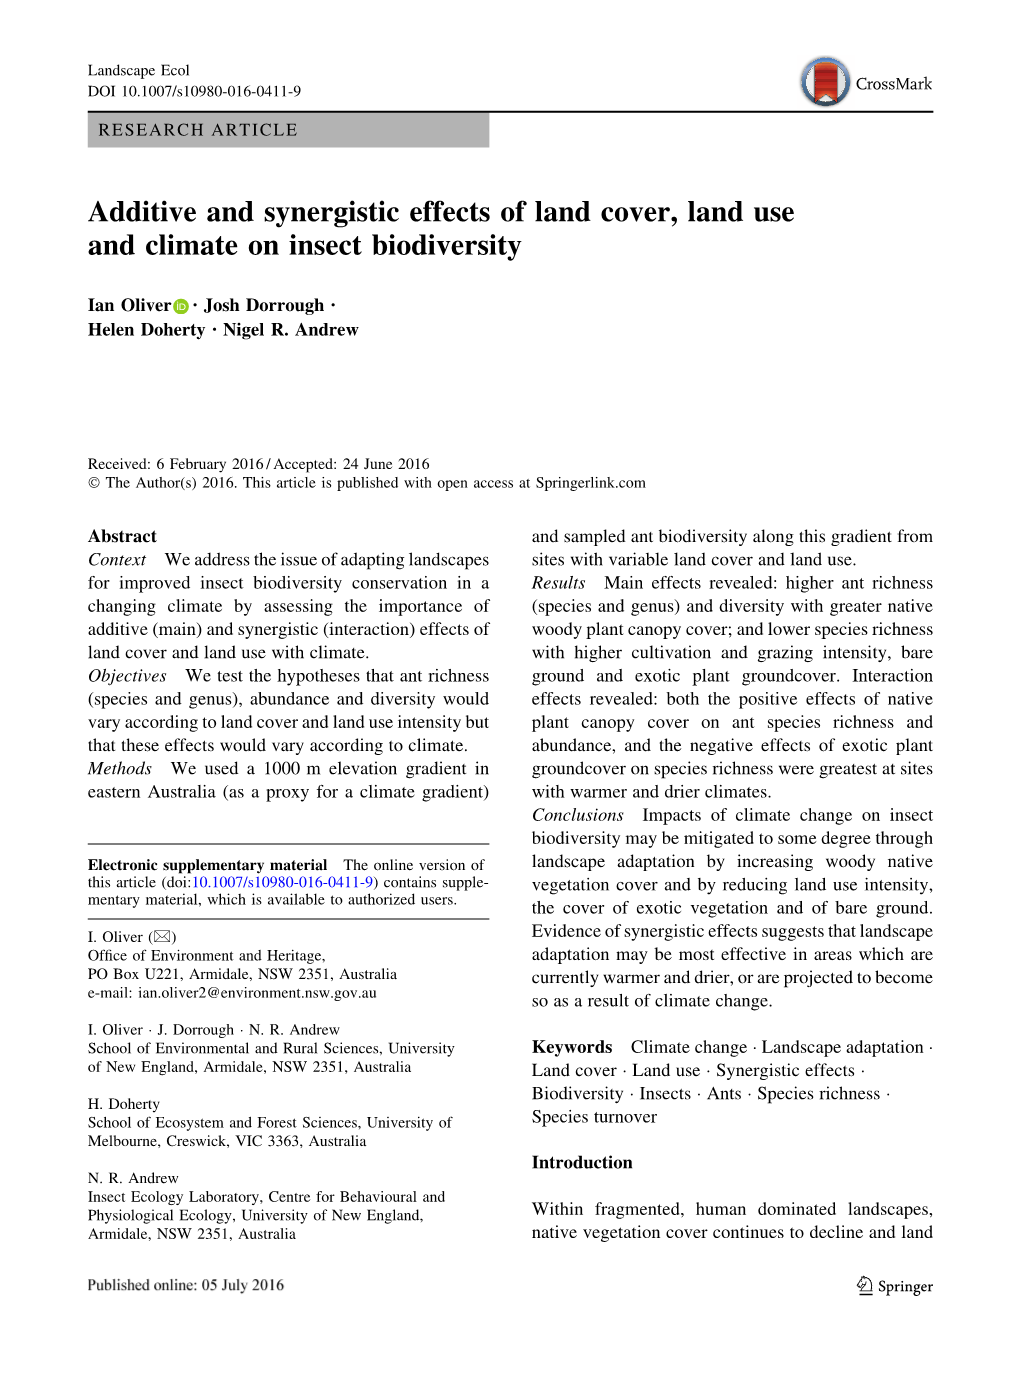 Additive and Synergistic Effects of Land Cover, Land Use and Climate on Insect Biodiversity